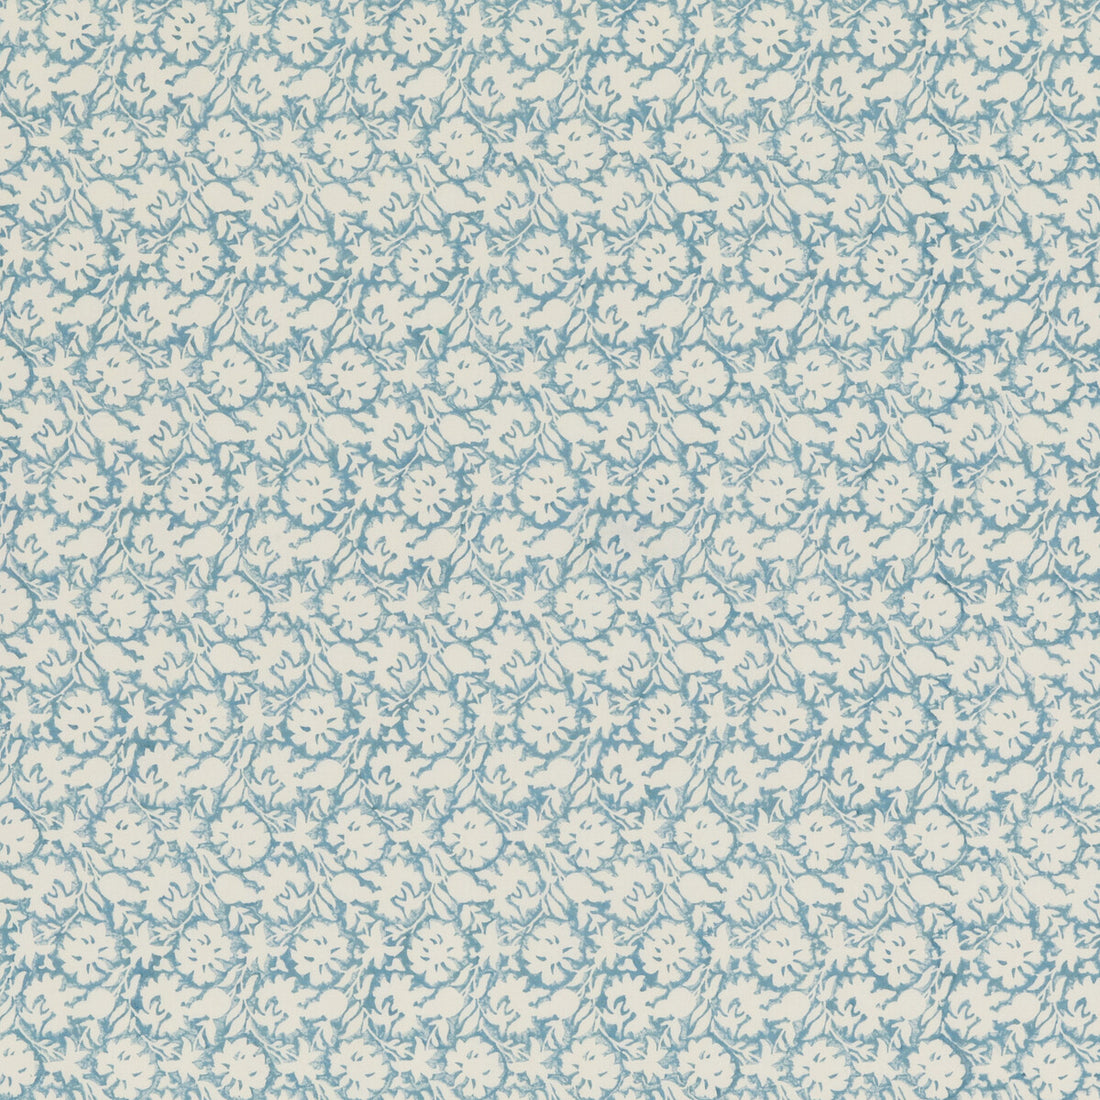 Flower Press fabric in soft blue color - pattern PP50480.4.0 - by Baker Lifestyle in the Block Party collection